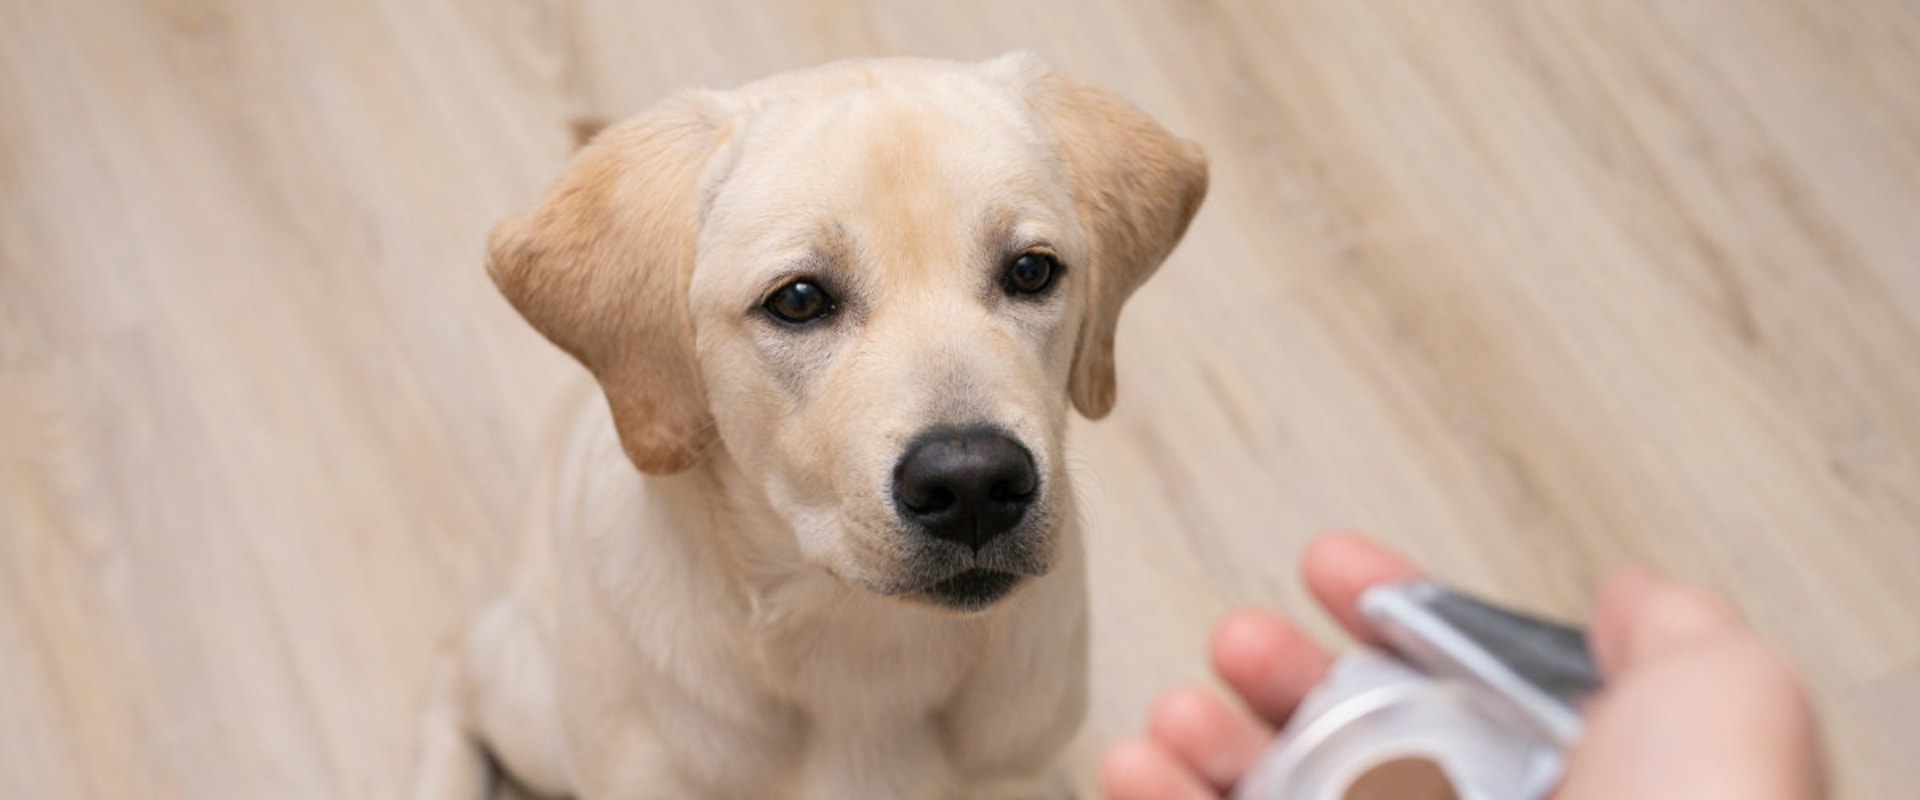 When Should You Start Giving Supplements to Your Dog?